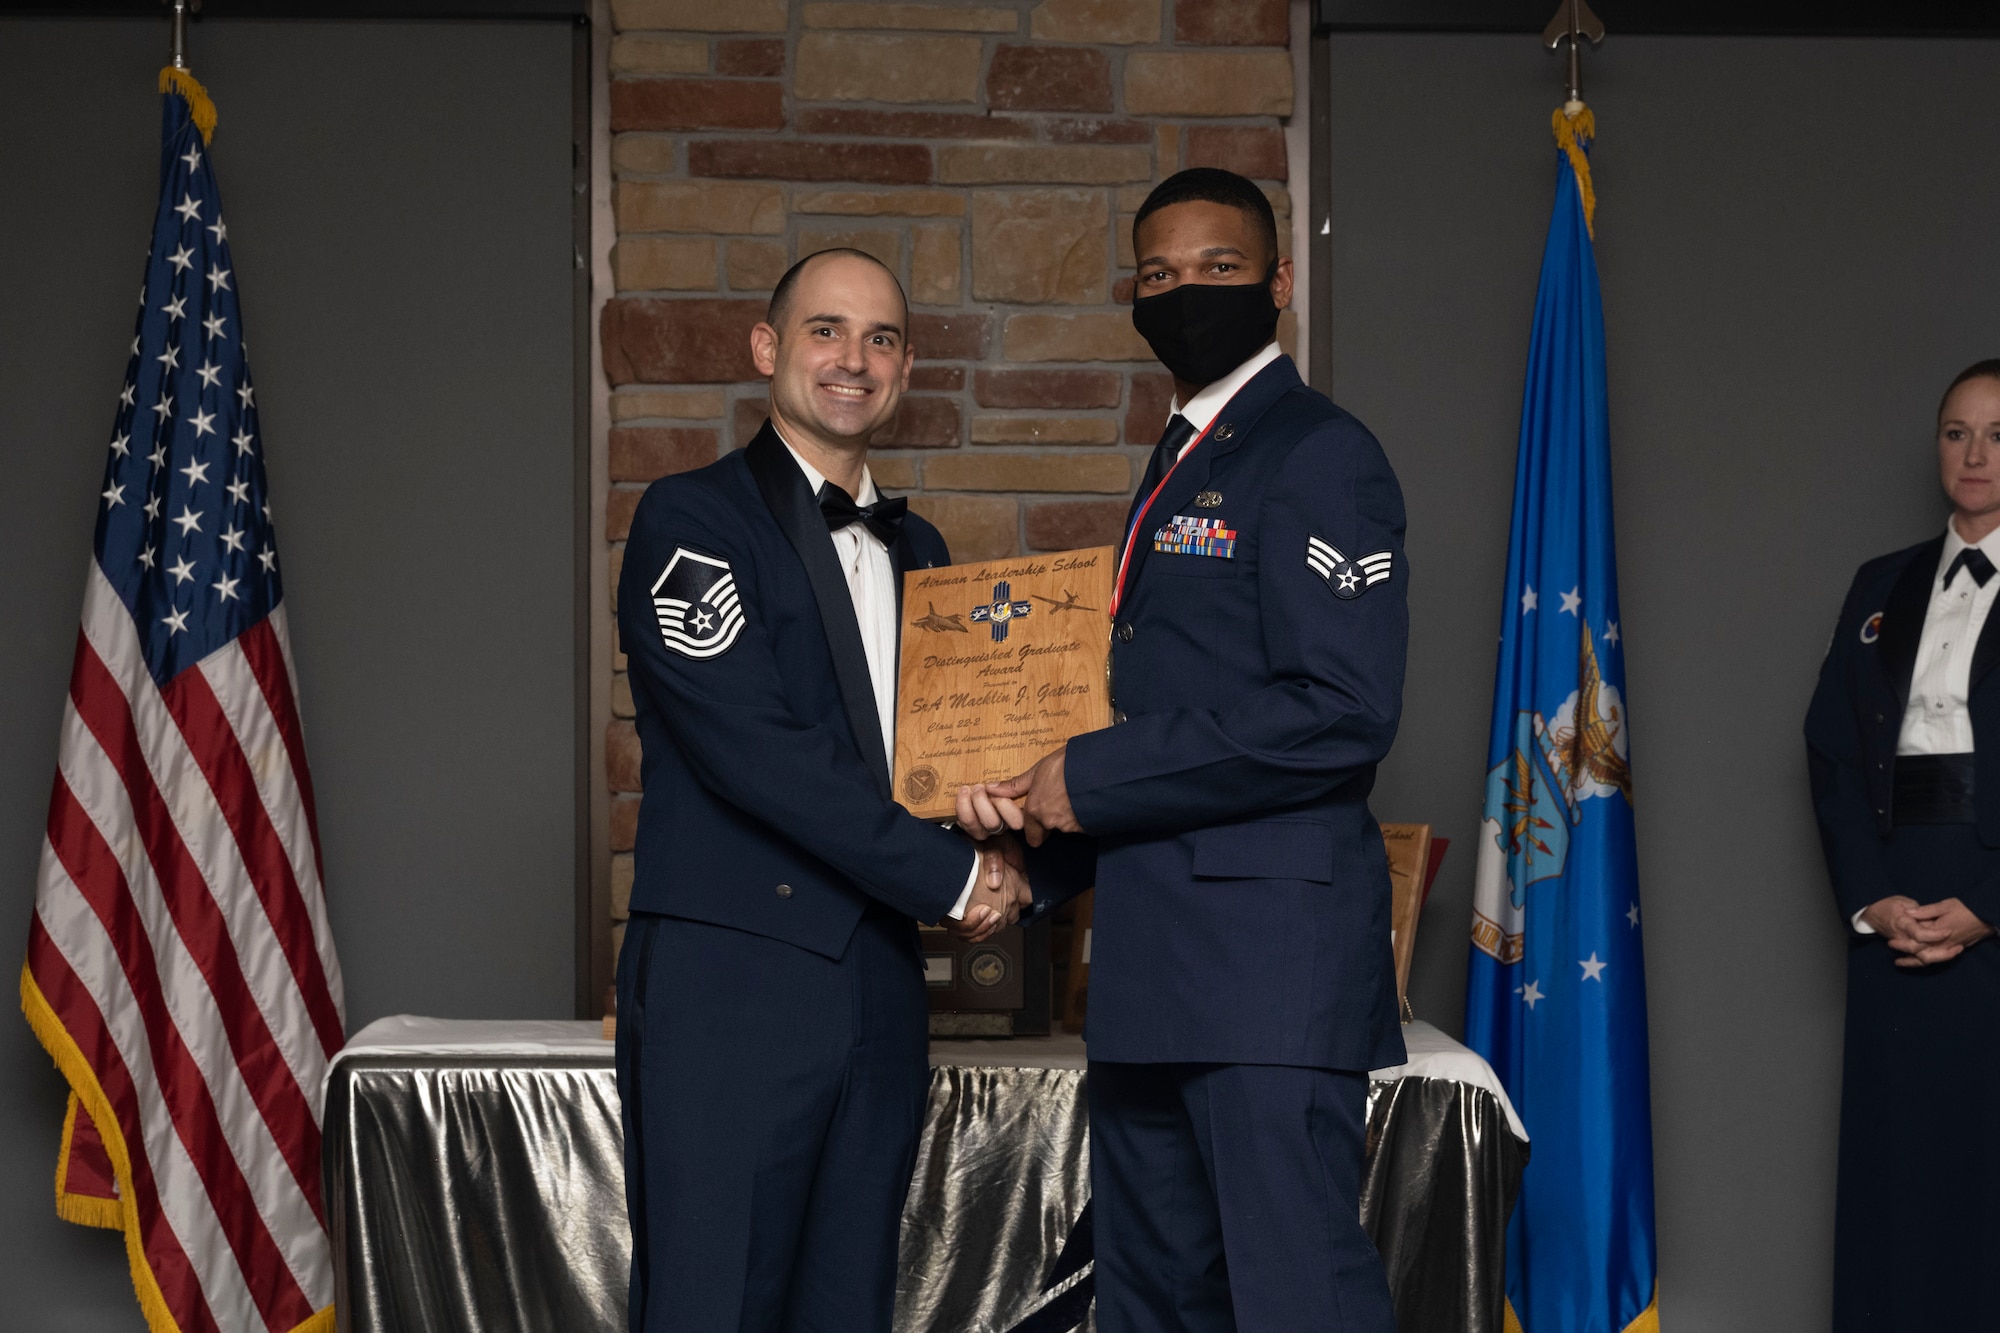 Senior Airman Macklin J. Gathers, Airman Leadership School graduate, accepts the distinguished graduate award during the graduation of ALS class 22-2, Dec. 9, 2021, on Holloman Air Force Base, New Mexico. The distinguished graduate award is presented to the top ten-percent of graduates for their performance in academic evaluations and demonstration of leadership. (U.S. Air Force photo by Senior Airman Kristin Weathersby)